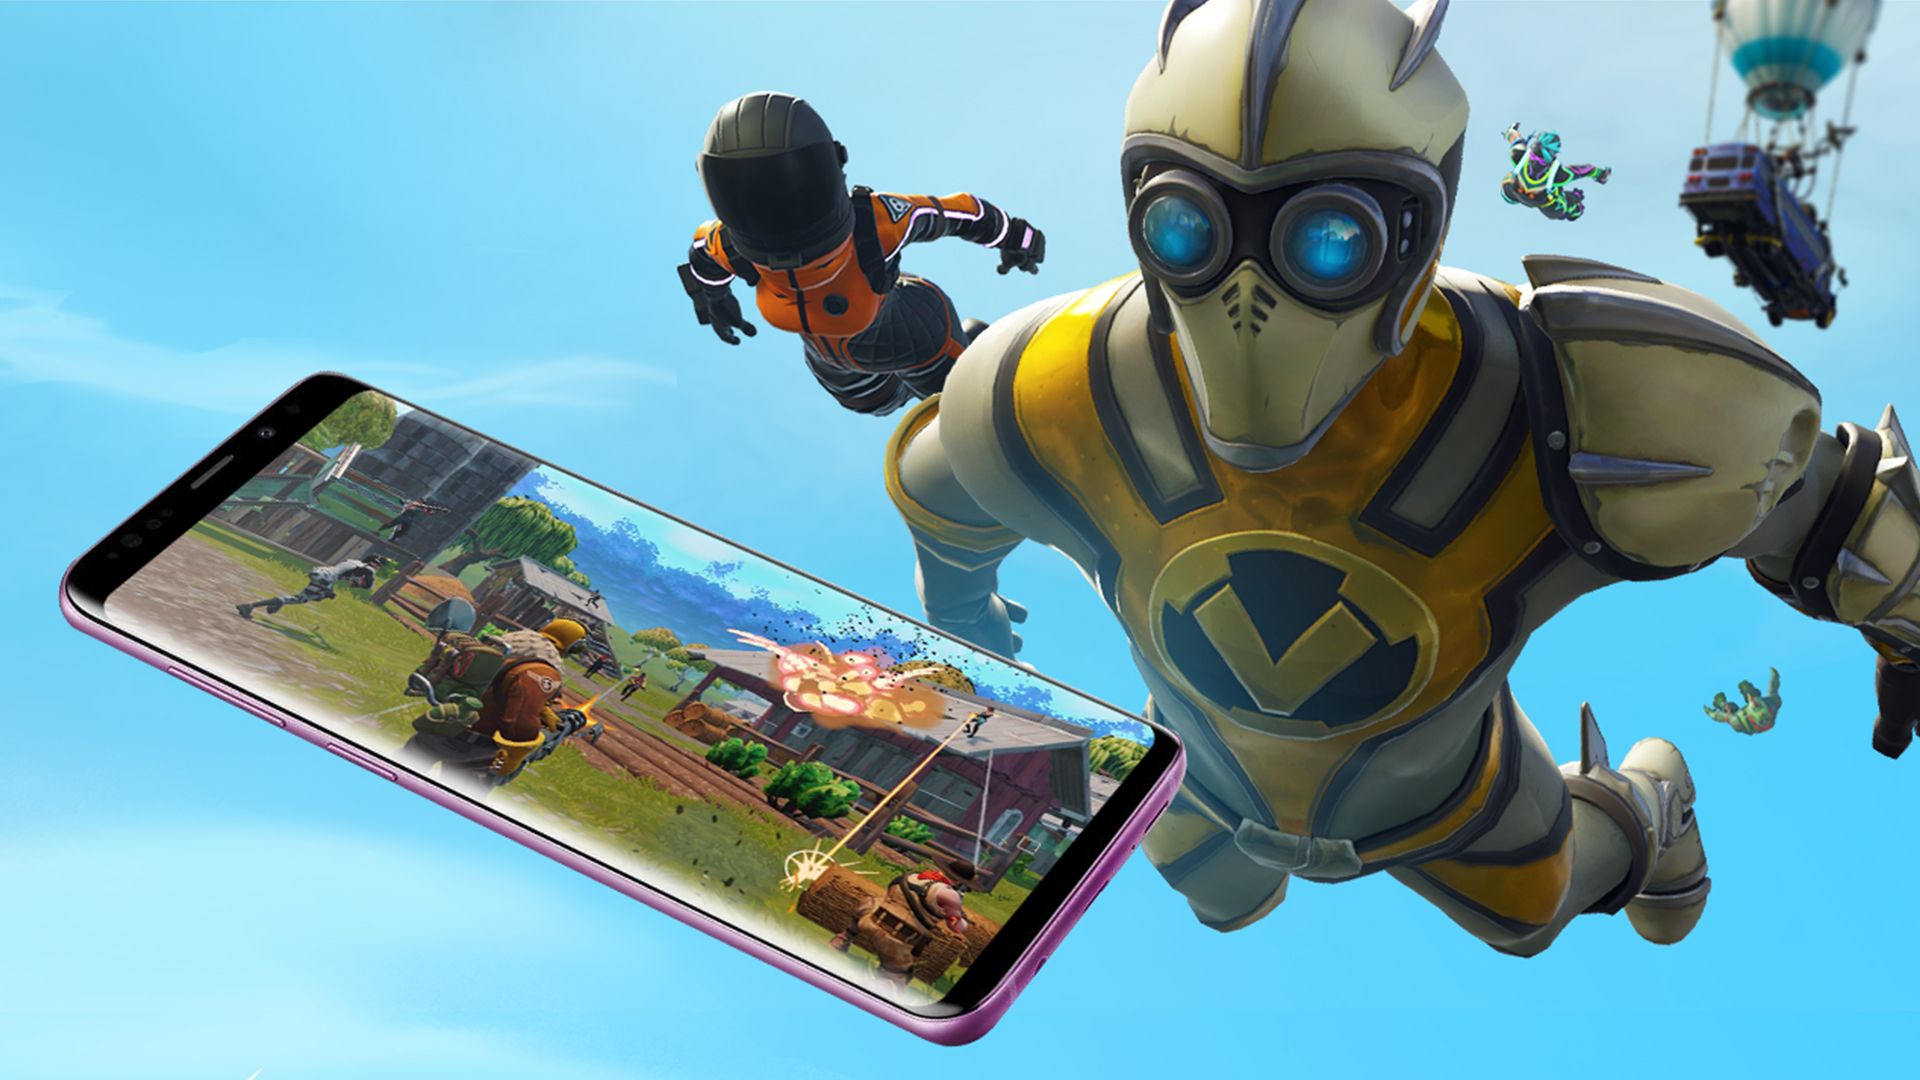 Fortnite2Fblog2FAndroid2FBR05 Header 16 9 AndroidLaunch 1920x1080 7cab9f216f2f6f928f8d5d2394be157610e0638b